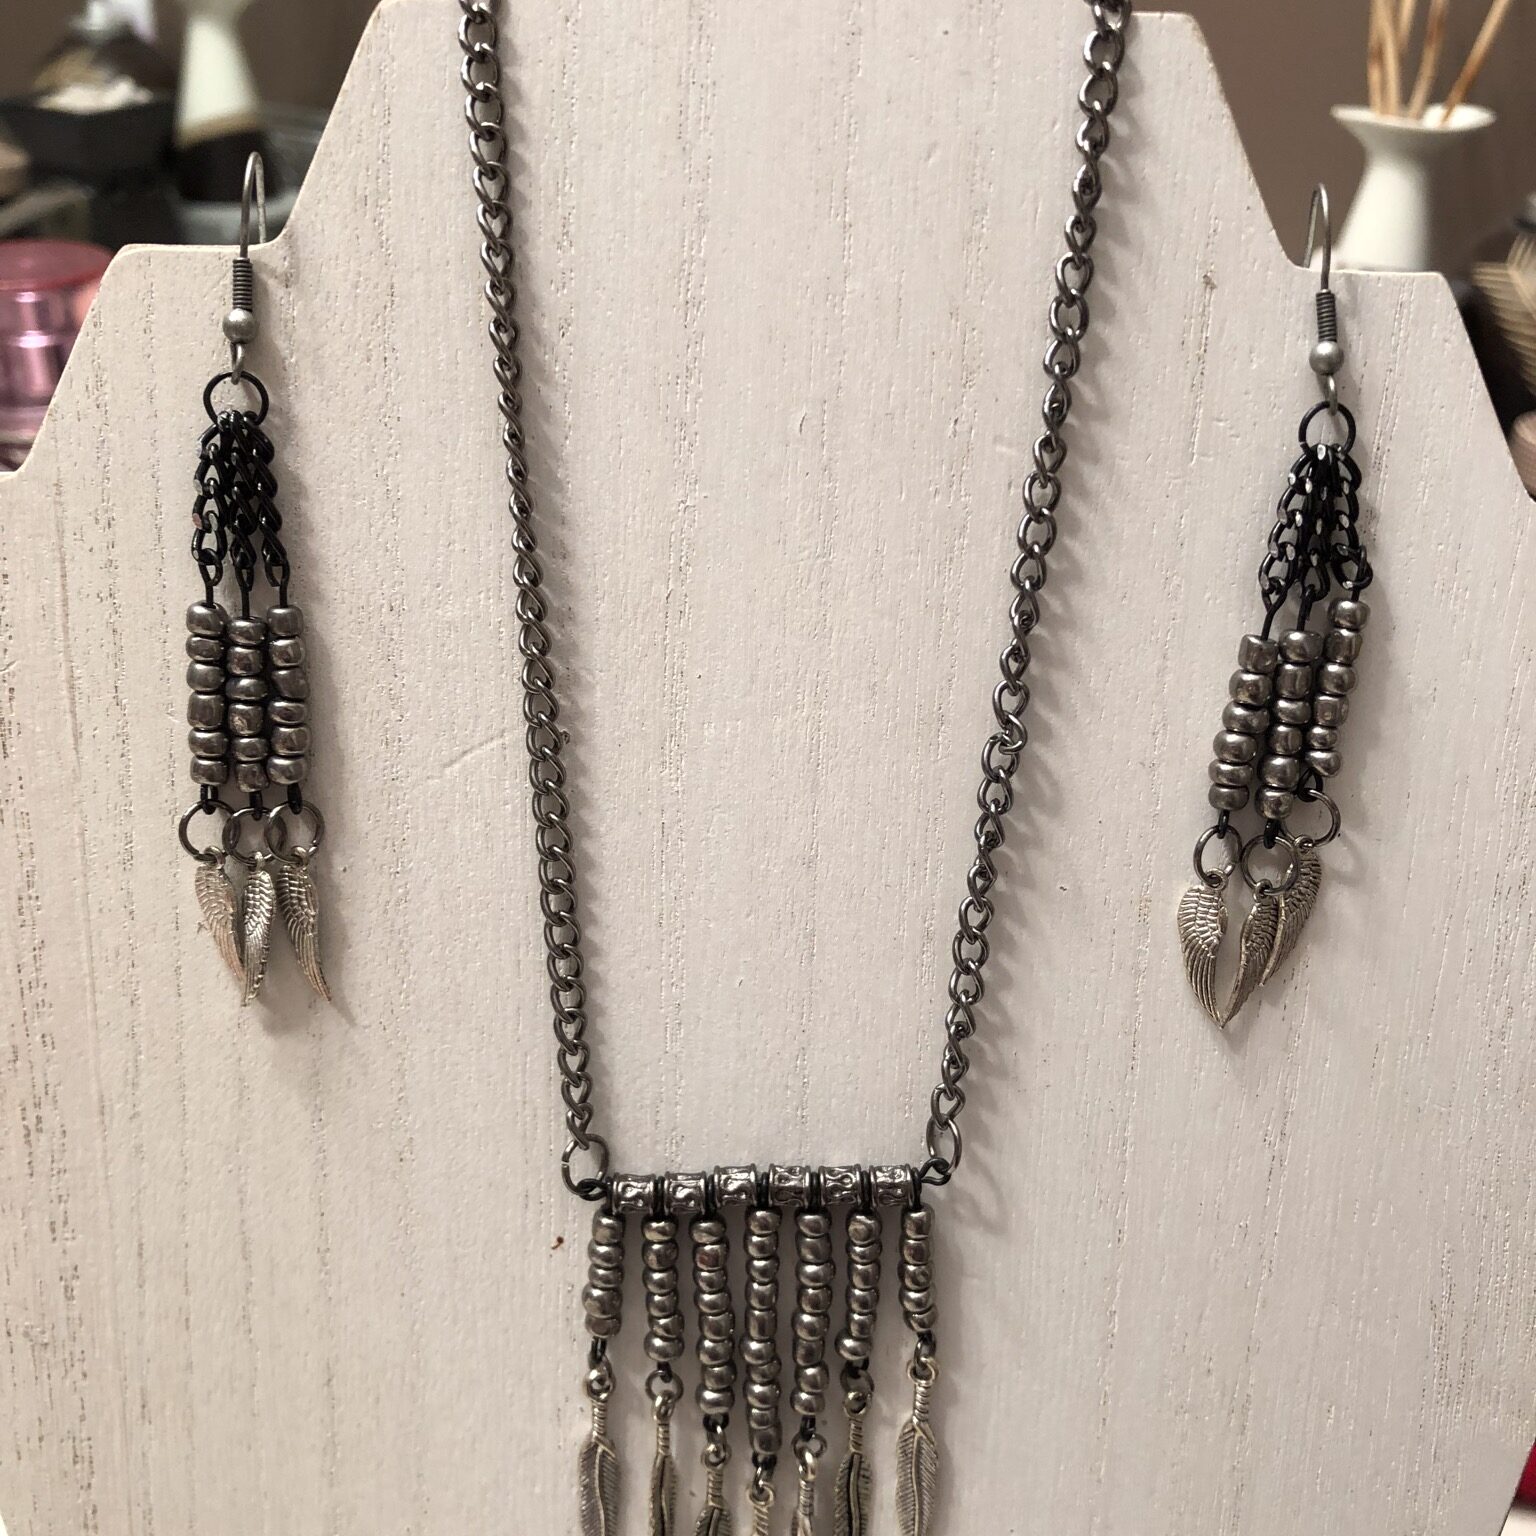 Sharon Robinson, craft maker, crafts, jewelry, jewelry maker, dreamcatchers, sterling silver, Indigenous Artist, First Nations, Indigenous Arts Collective of Canada, Pass The Feather